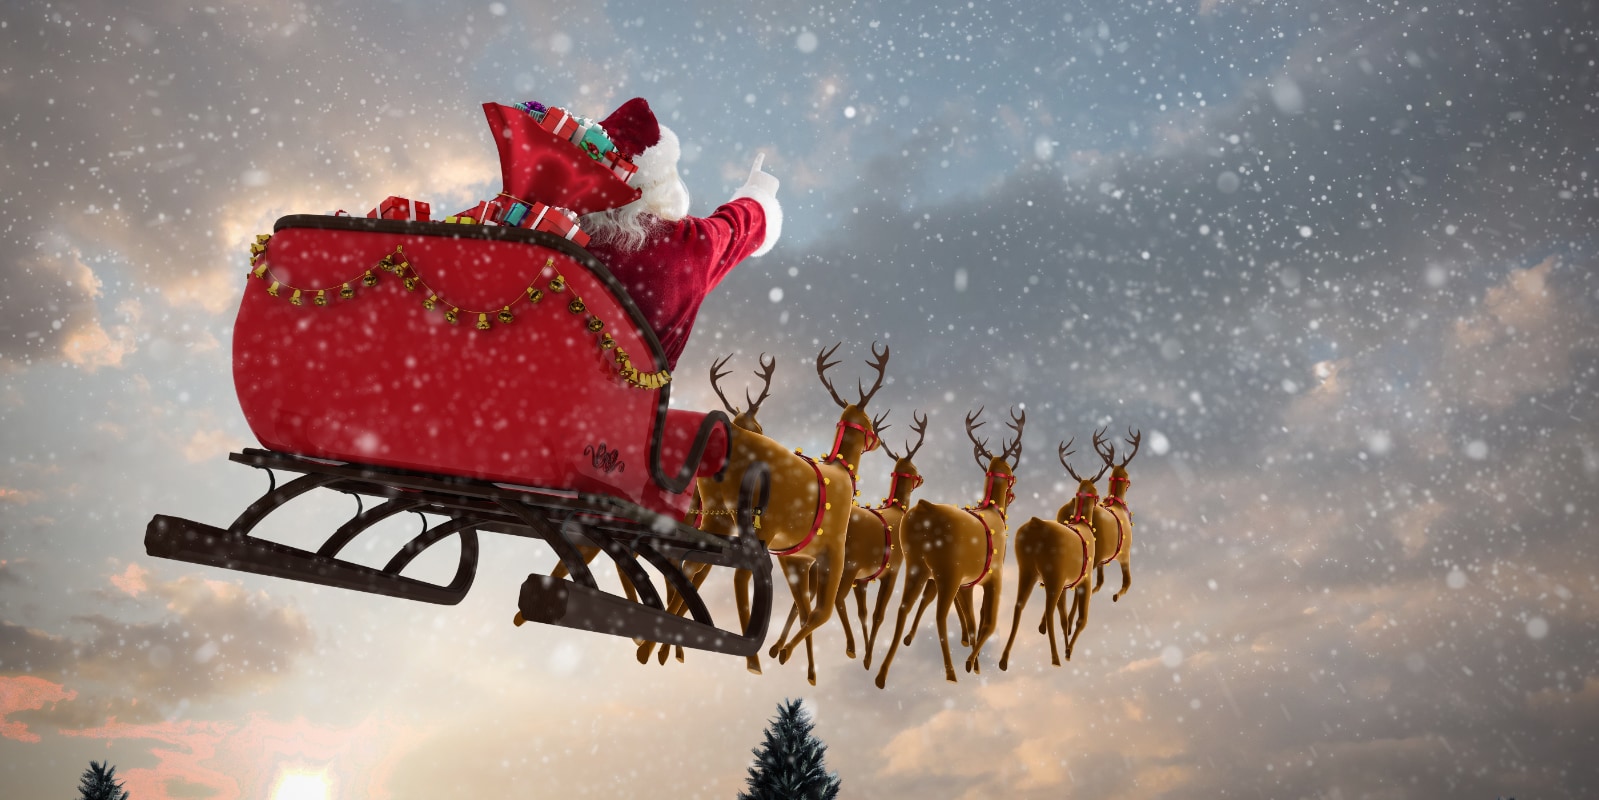 Composite Image Of Santa Claus Riding On Sleigh With Gift Box